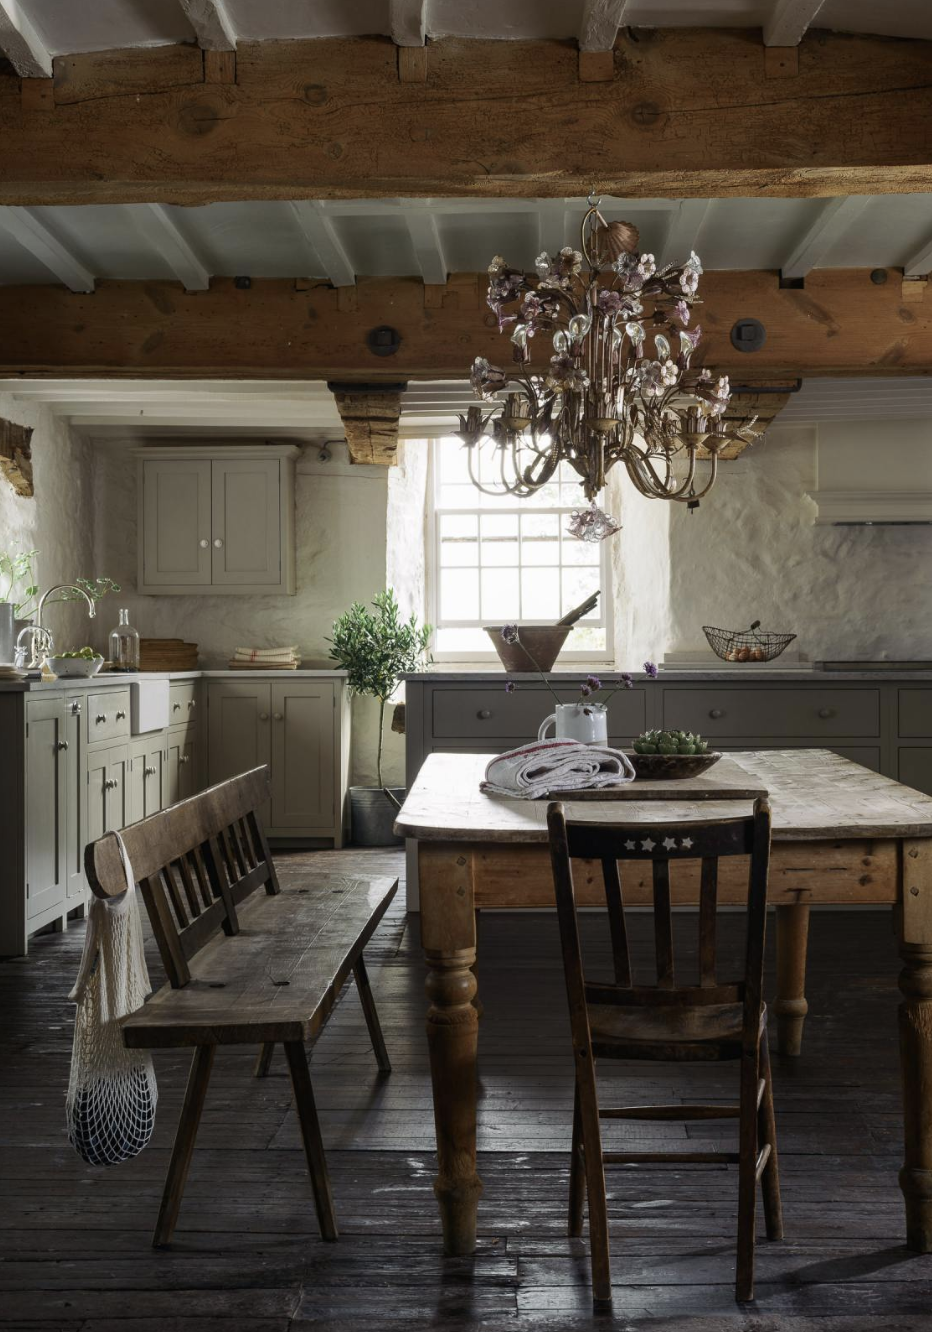 Designing a country kitchens